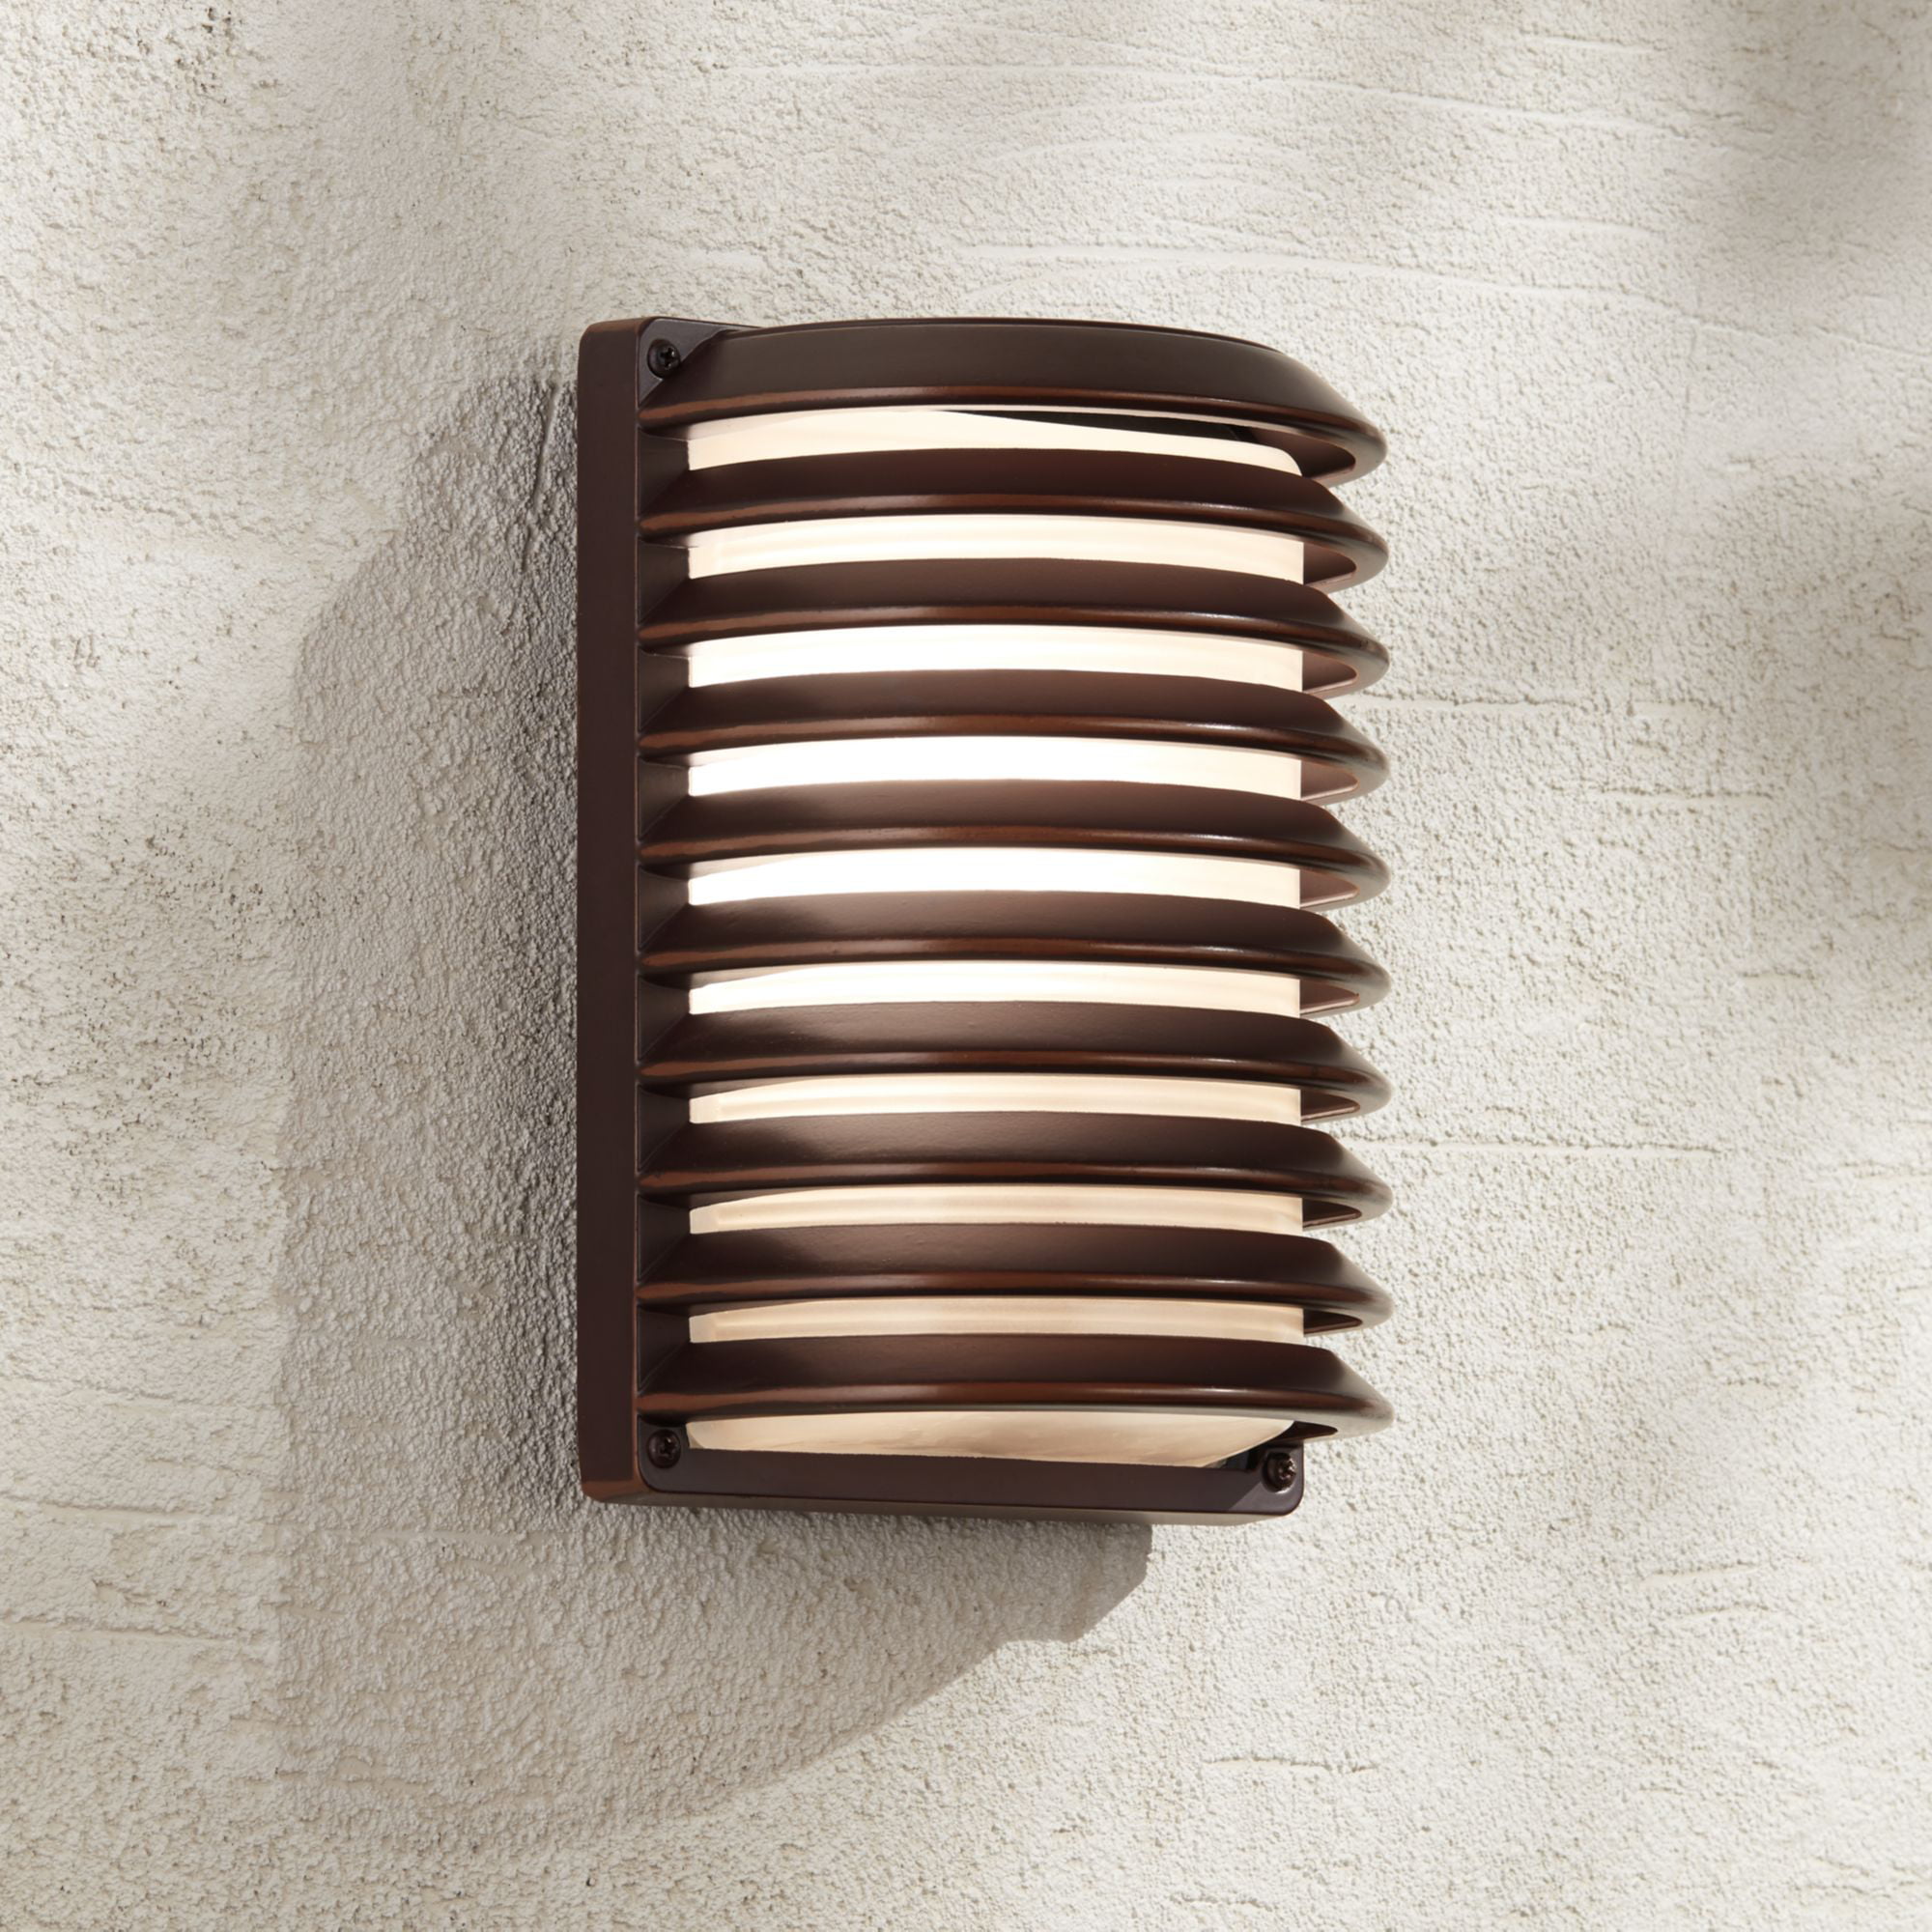 John Timberland Modern Outdoor Wall Light Fixture Rubbed Bronze 10" Banded Grid Frosted Glass